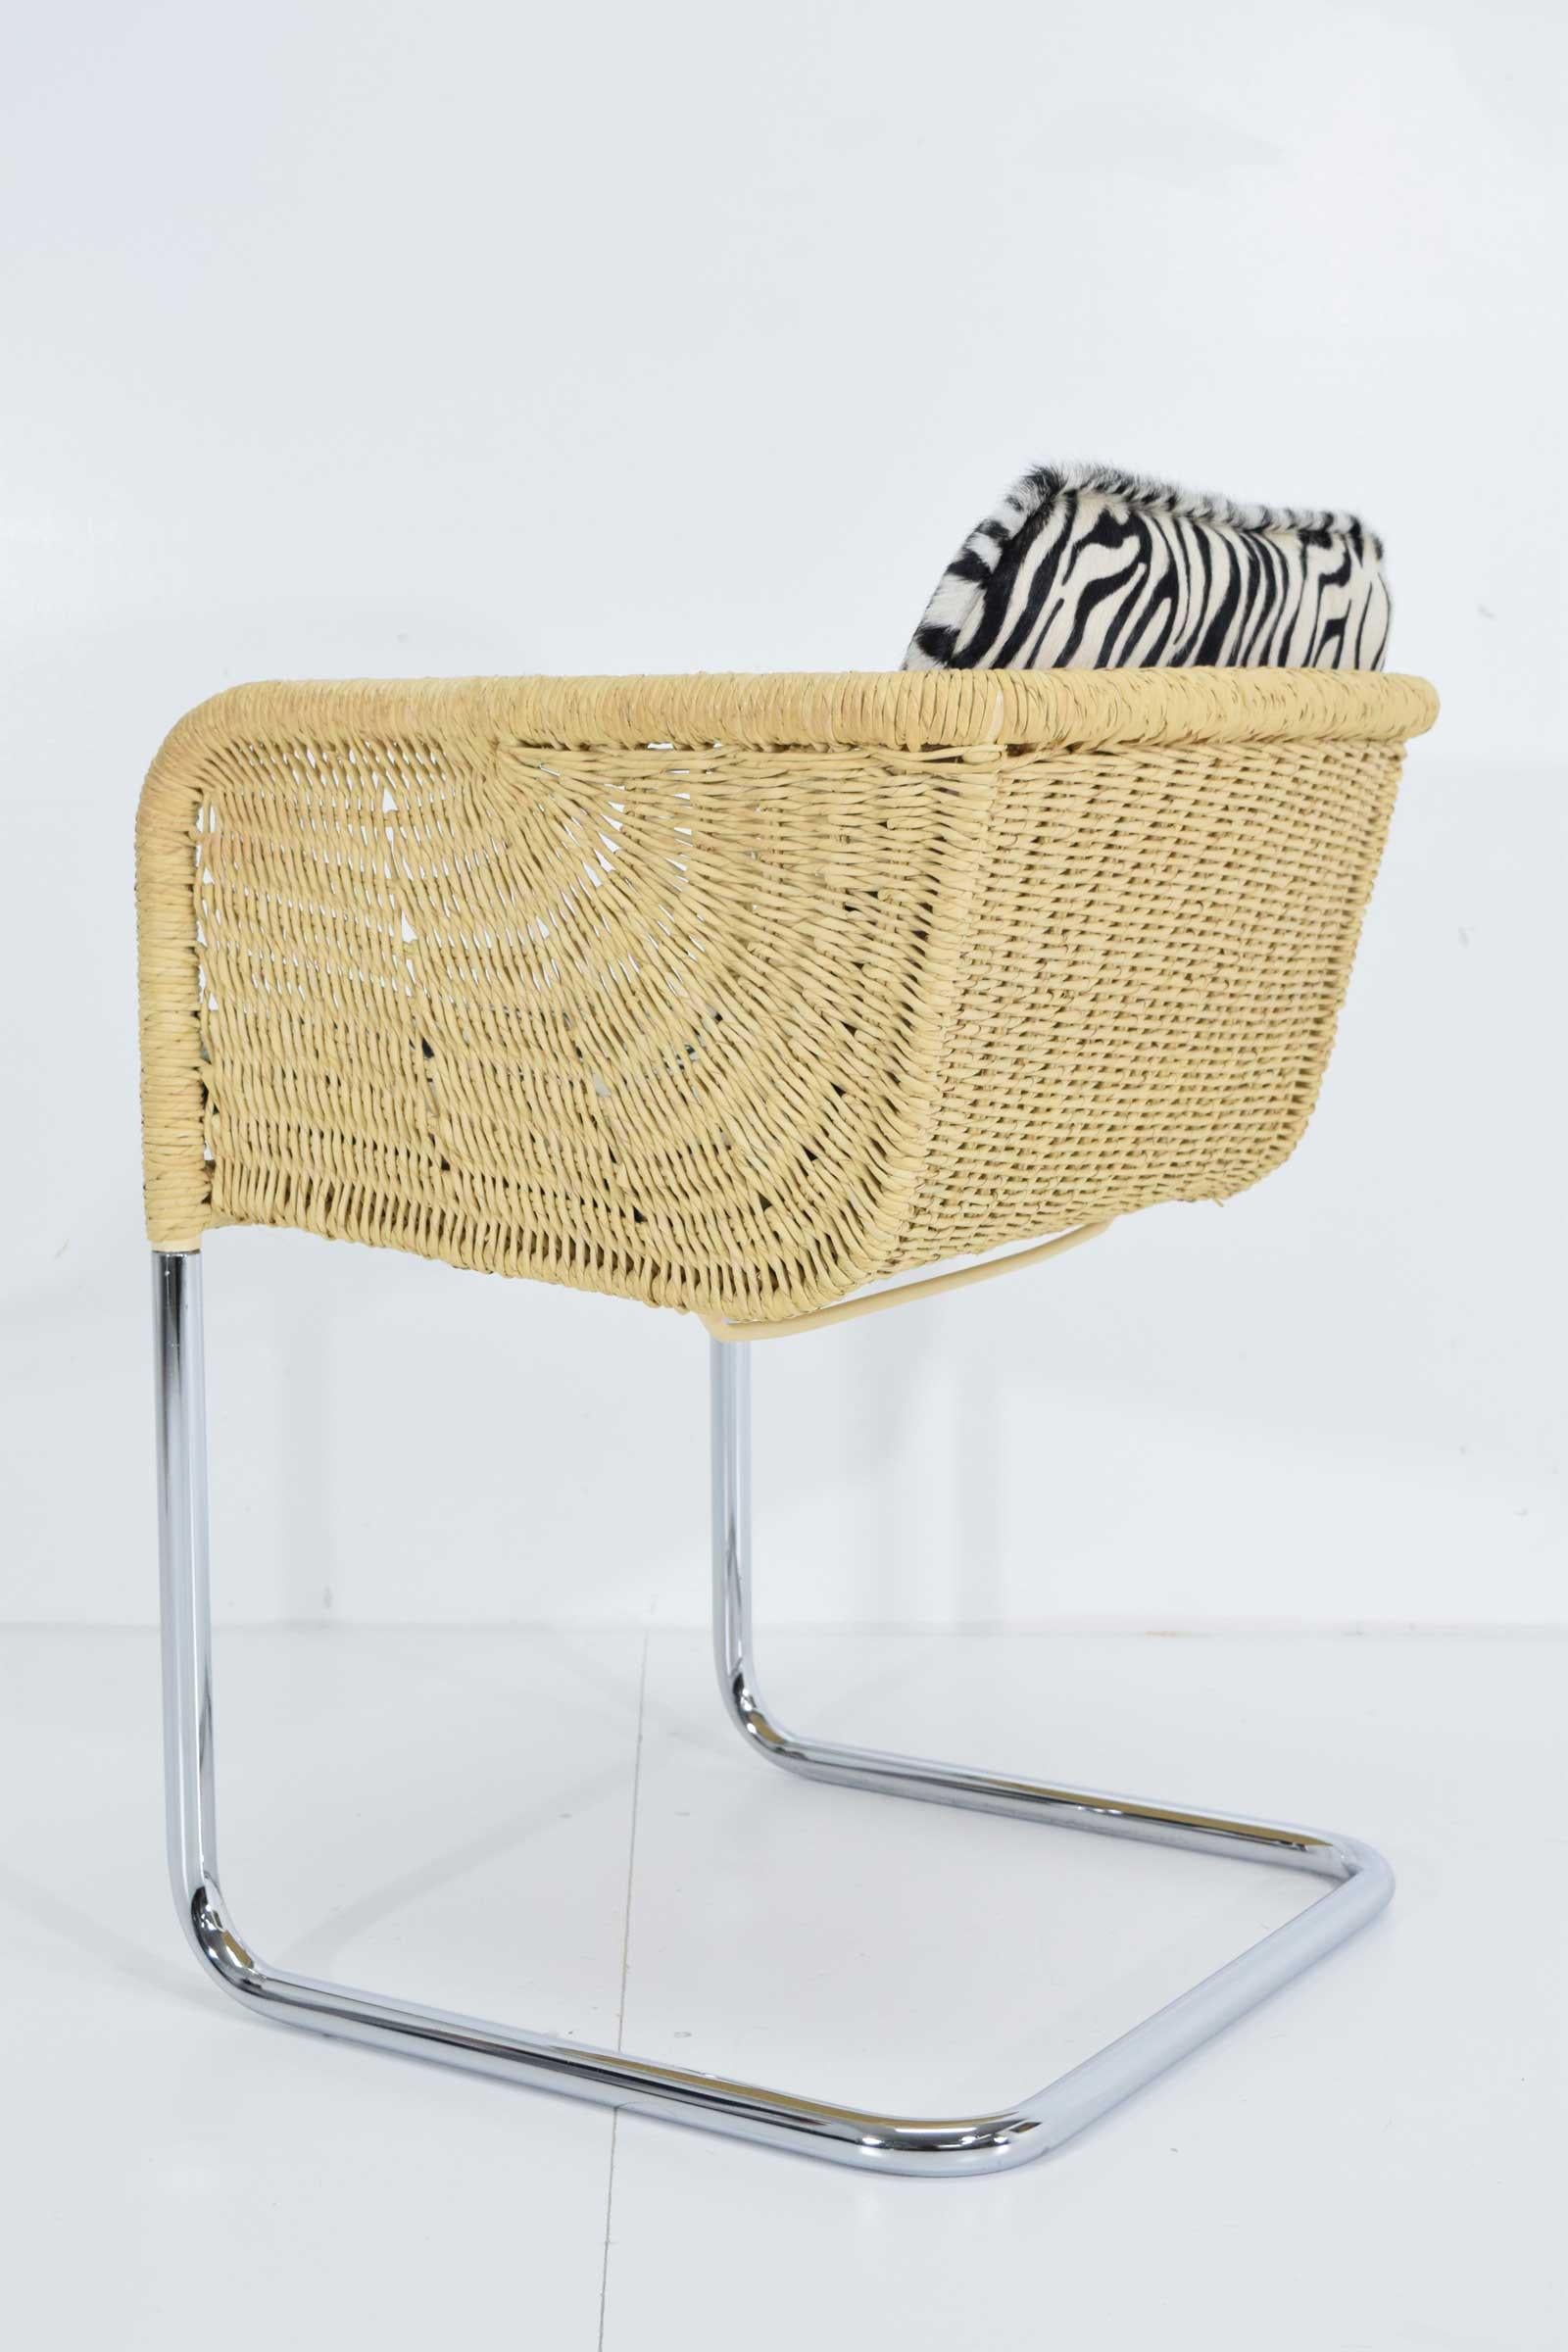 Harvey Probber Wicker Dining Chairs with Zebra Hide Cushions 3